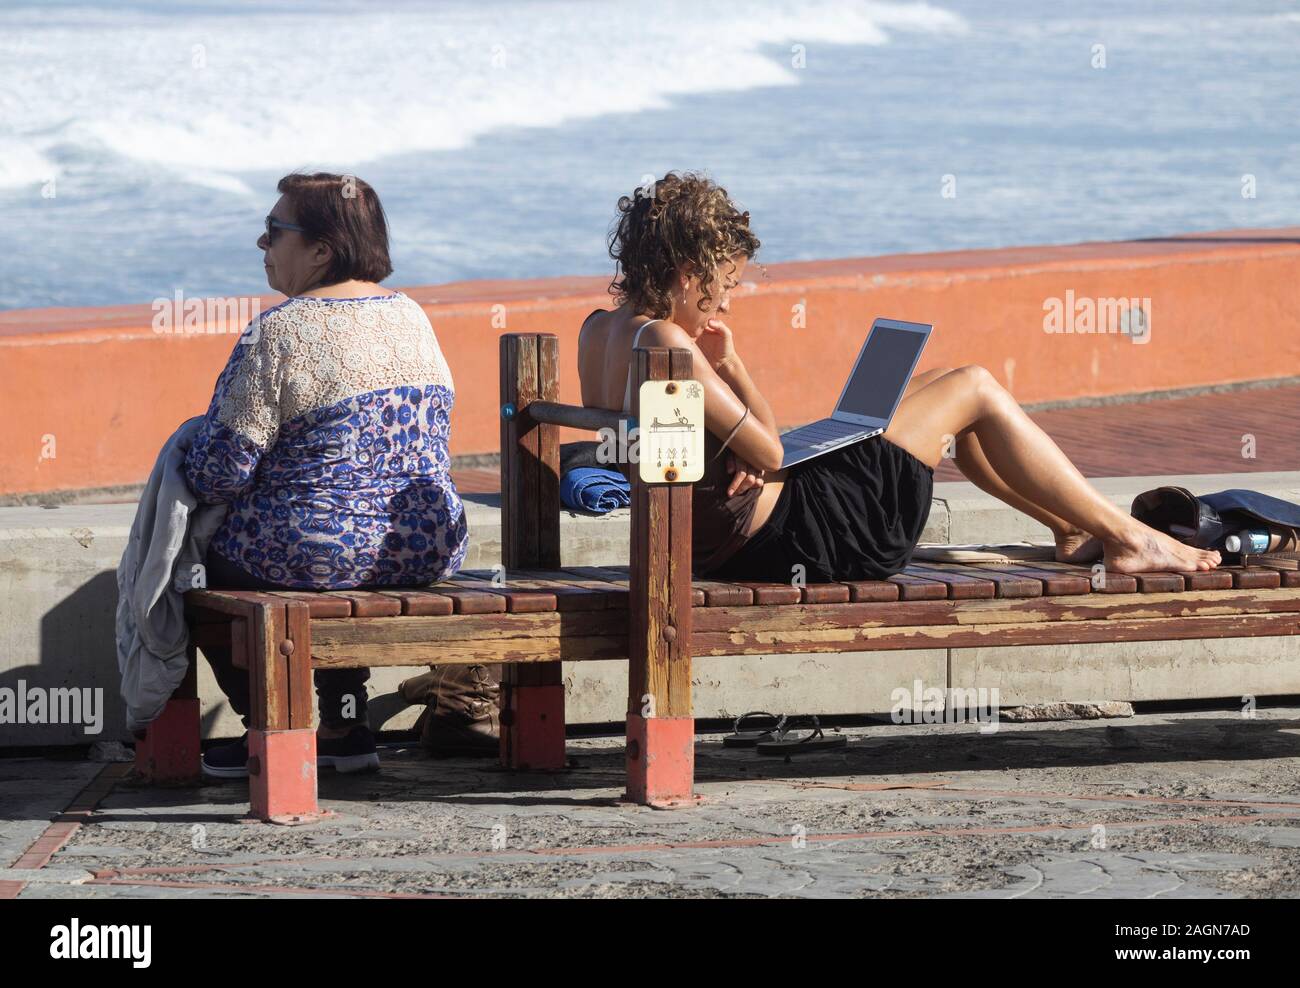 Younger woman on beach sitting on gym bench looking at laptop while elderly woman looks out to sea. Stock Photo